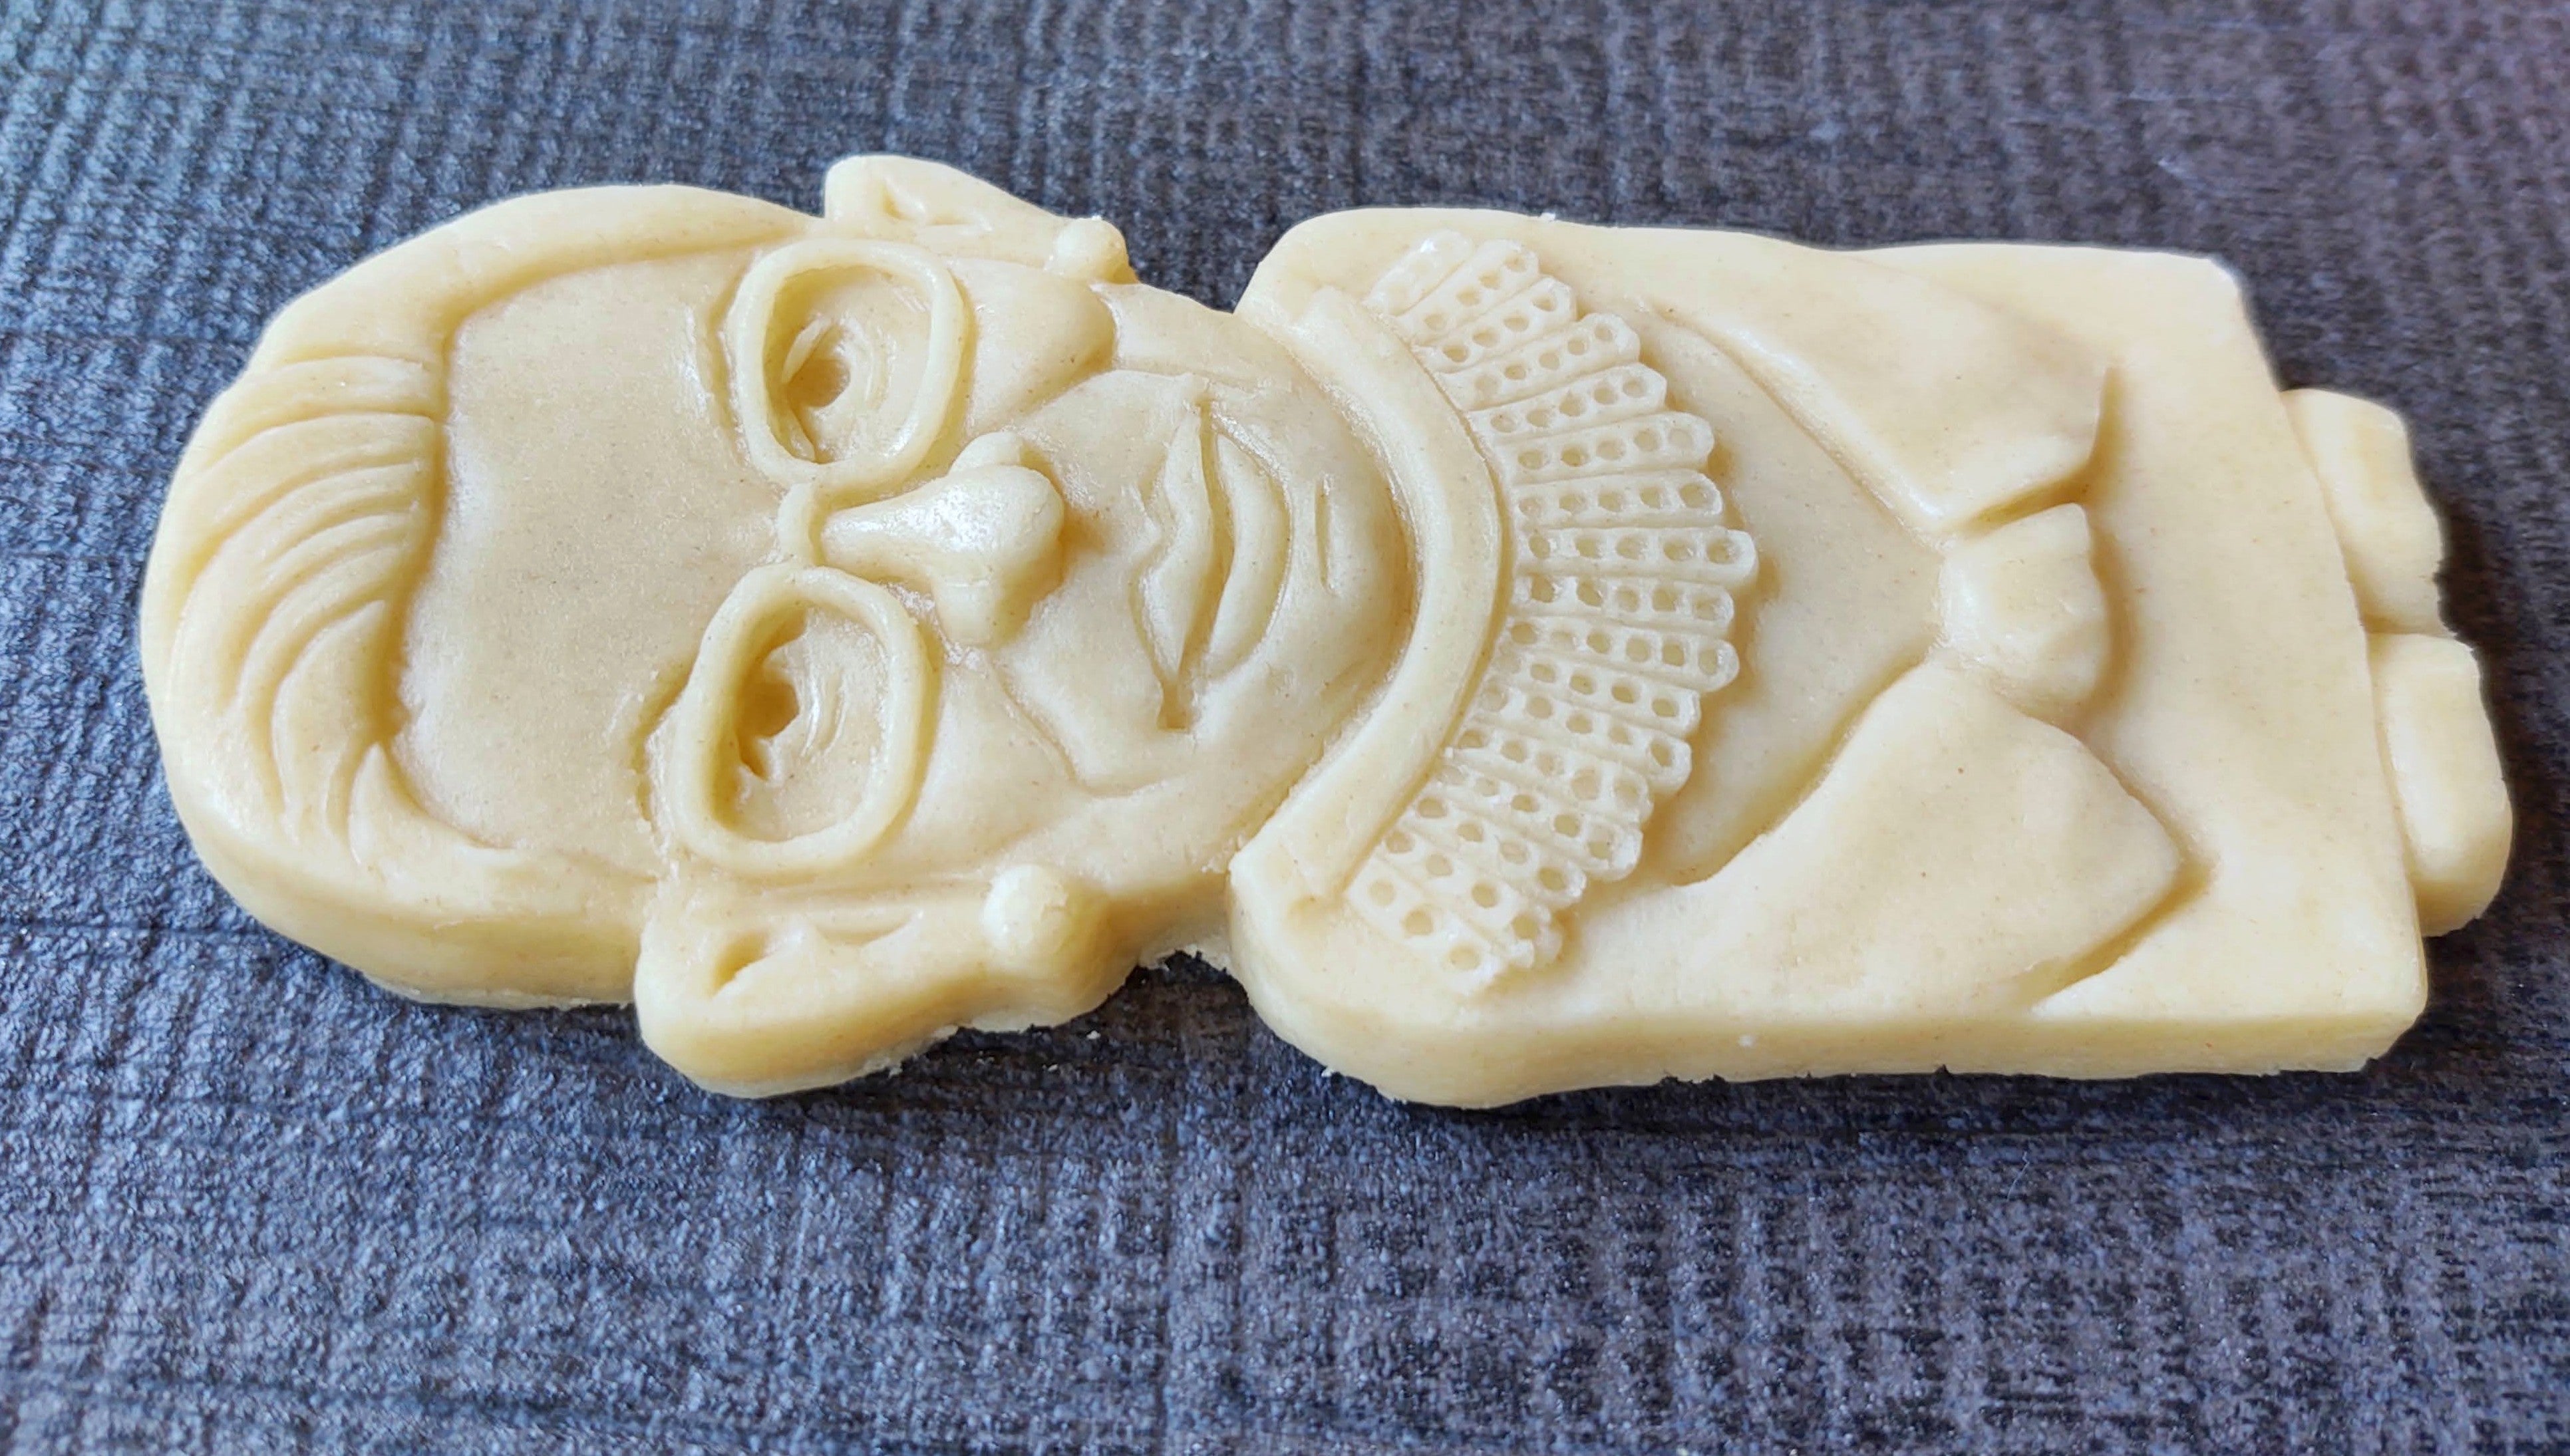 RBG Ruth Bader Ginsburg Silicone Cookie Mold